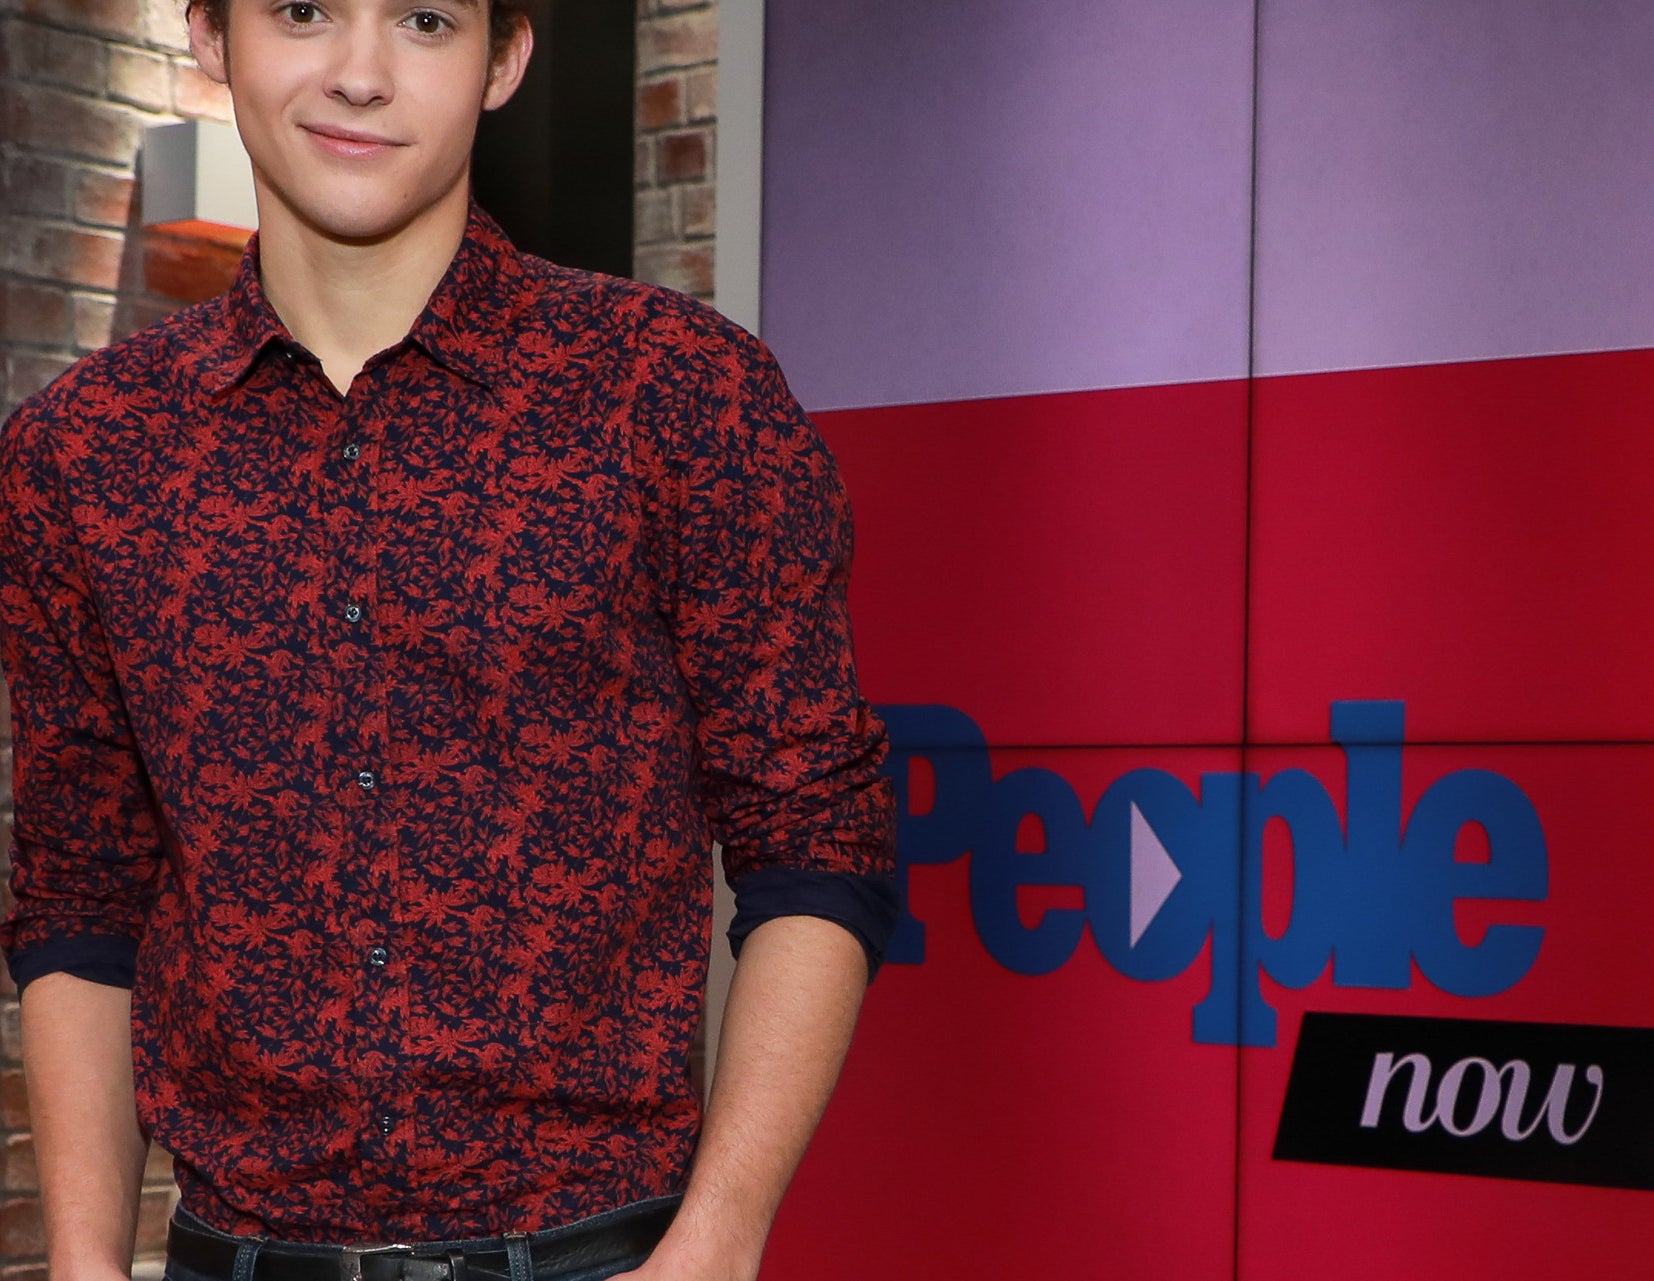 Joshua wears a red and blue floral patterned button down